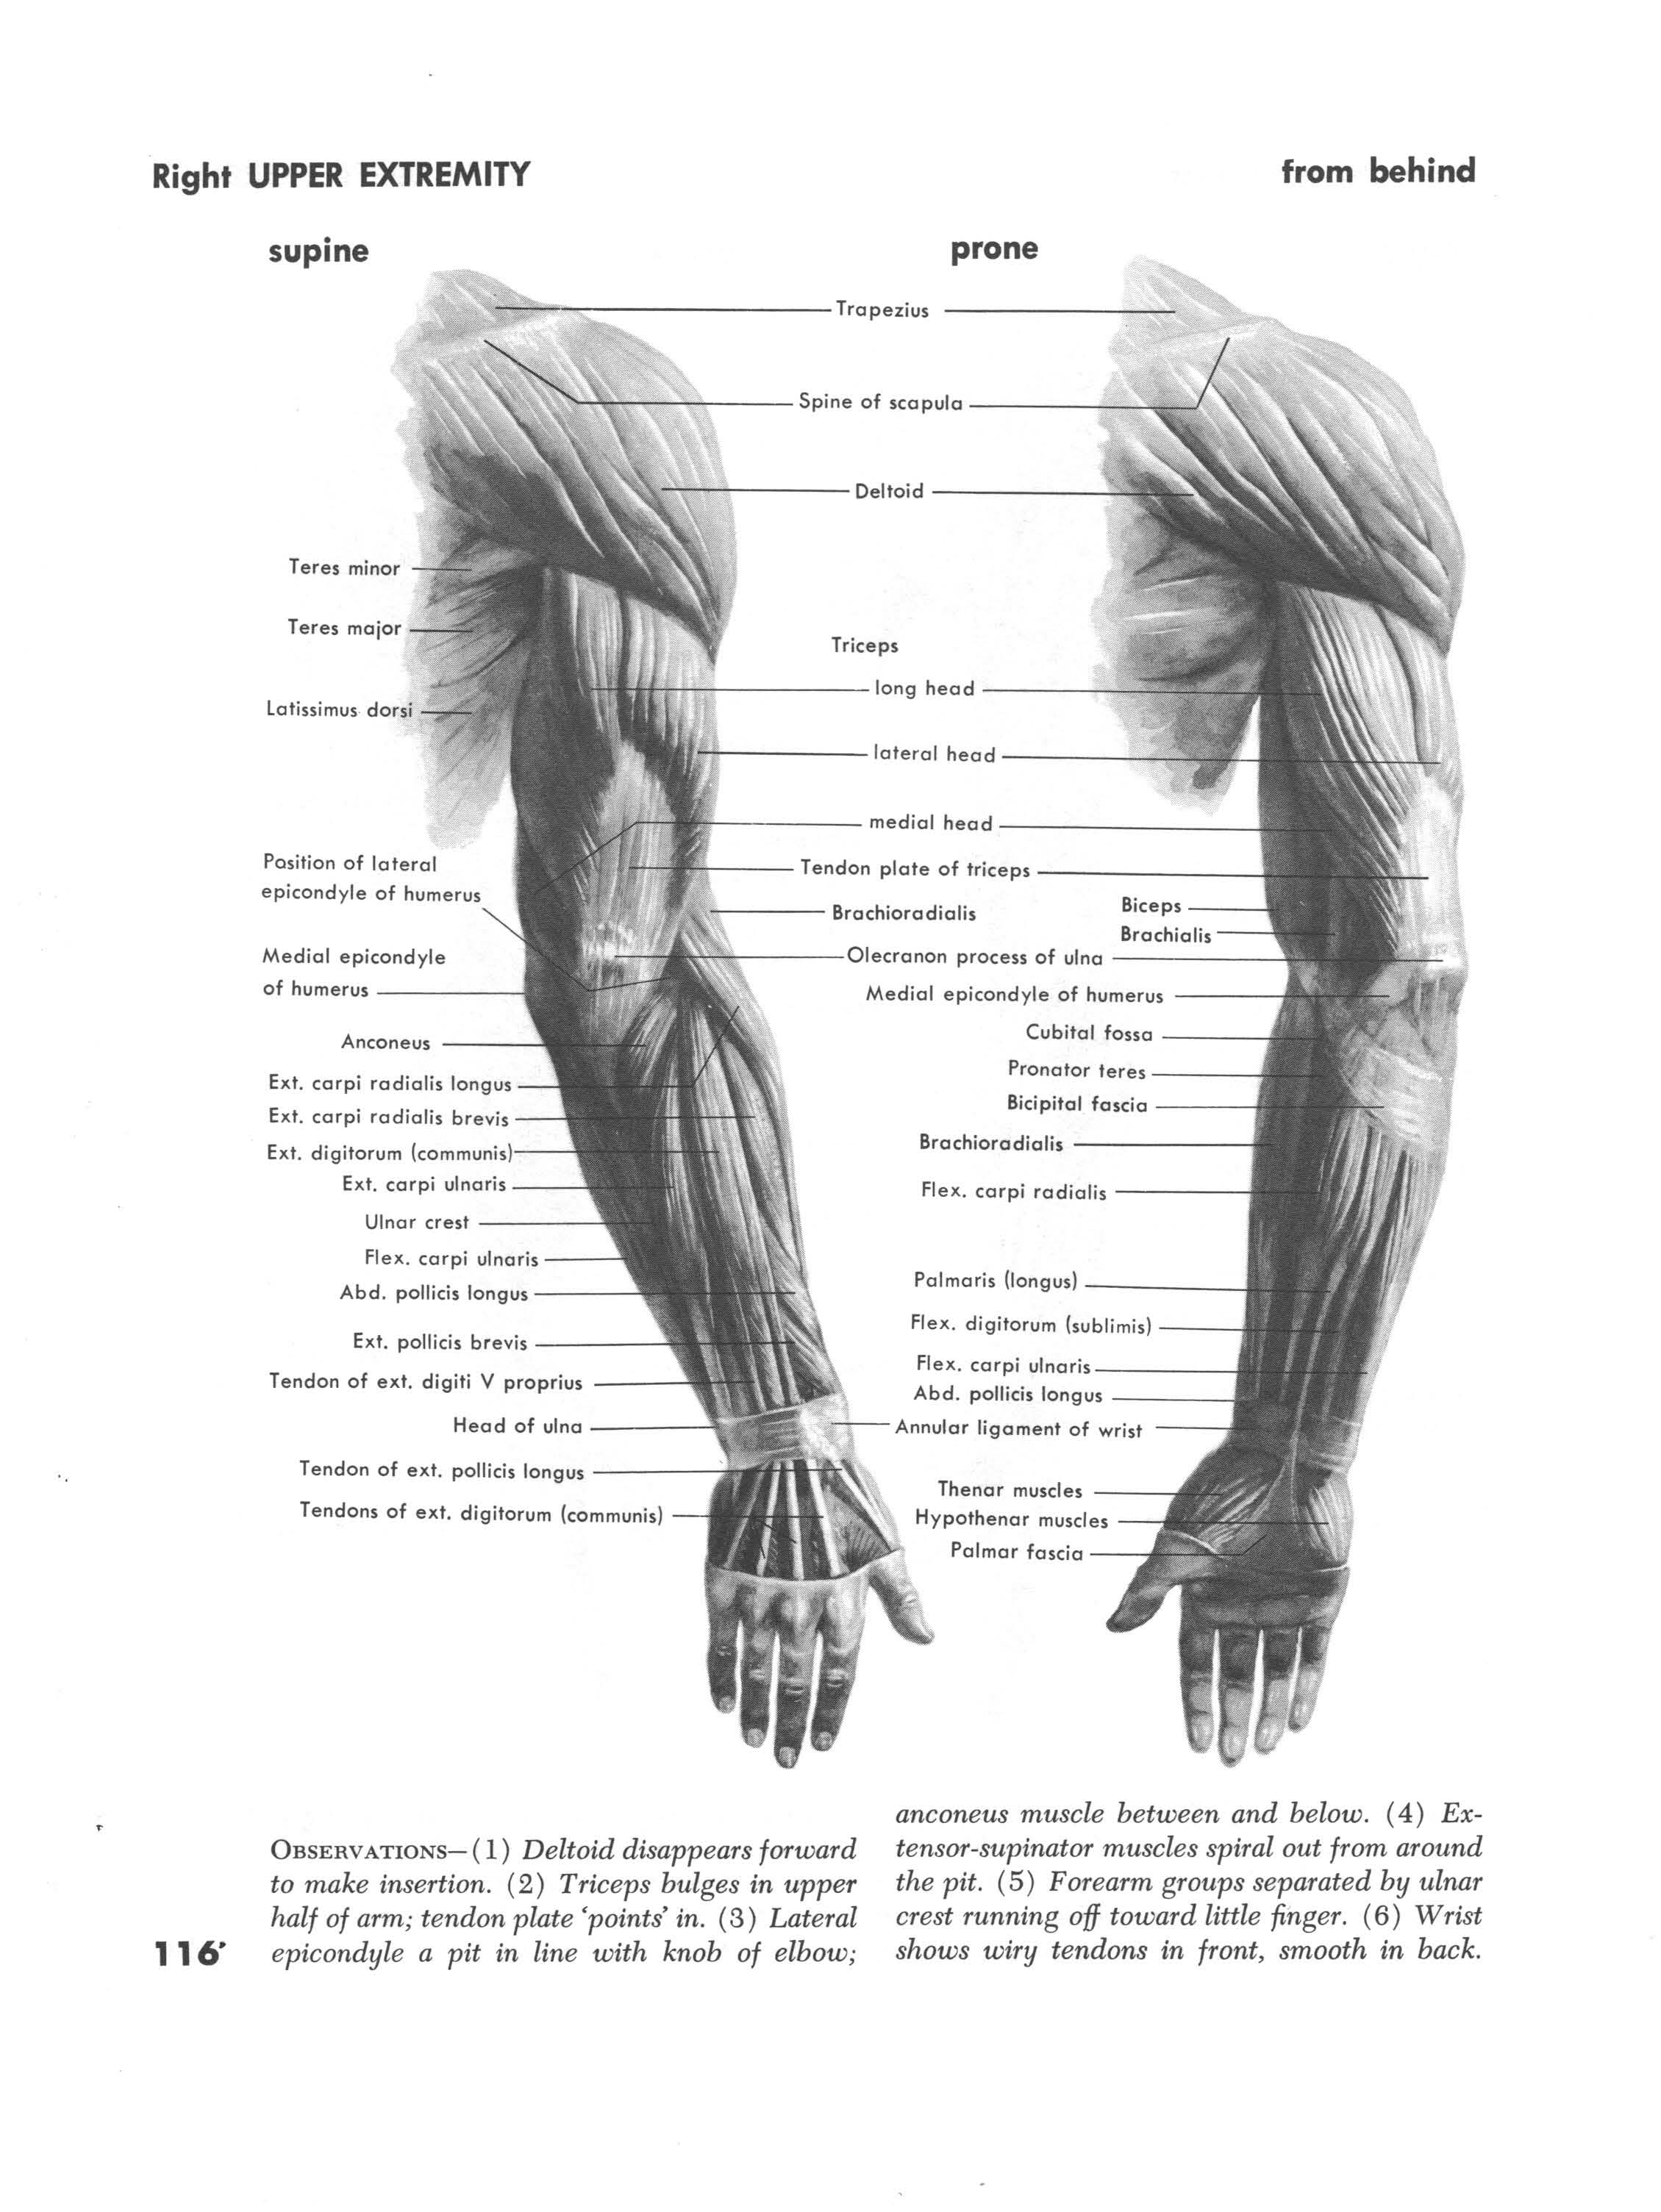 Muscles of the right upper extremity back view